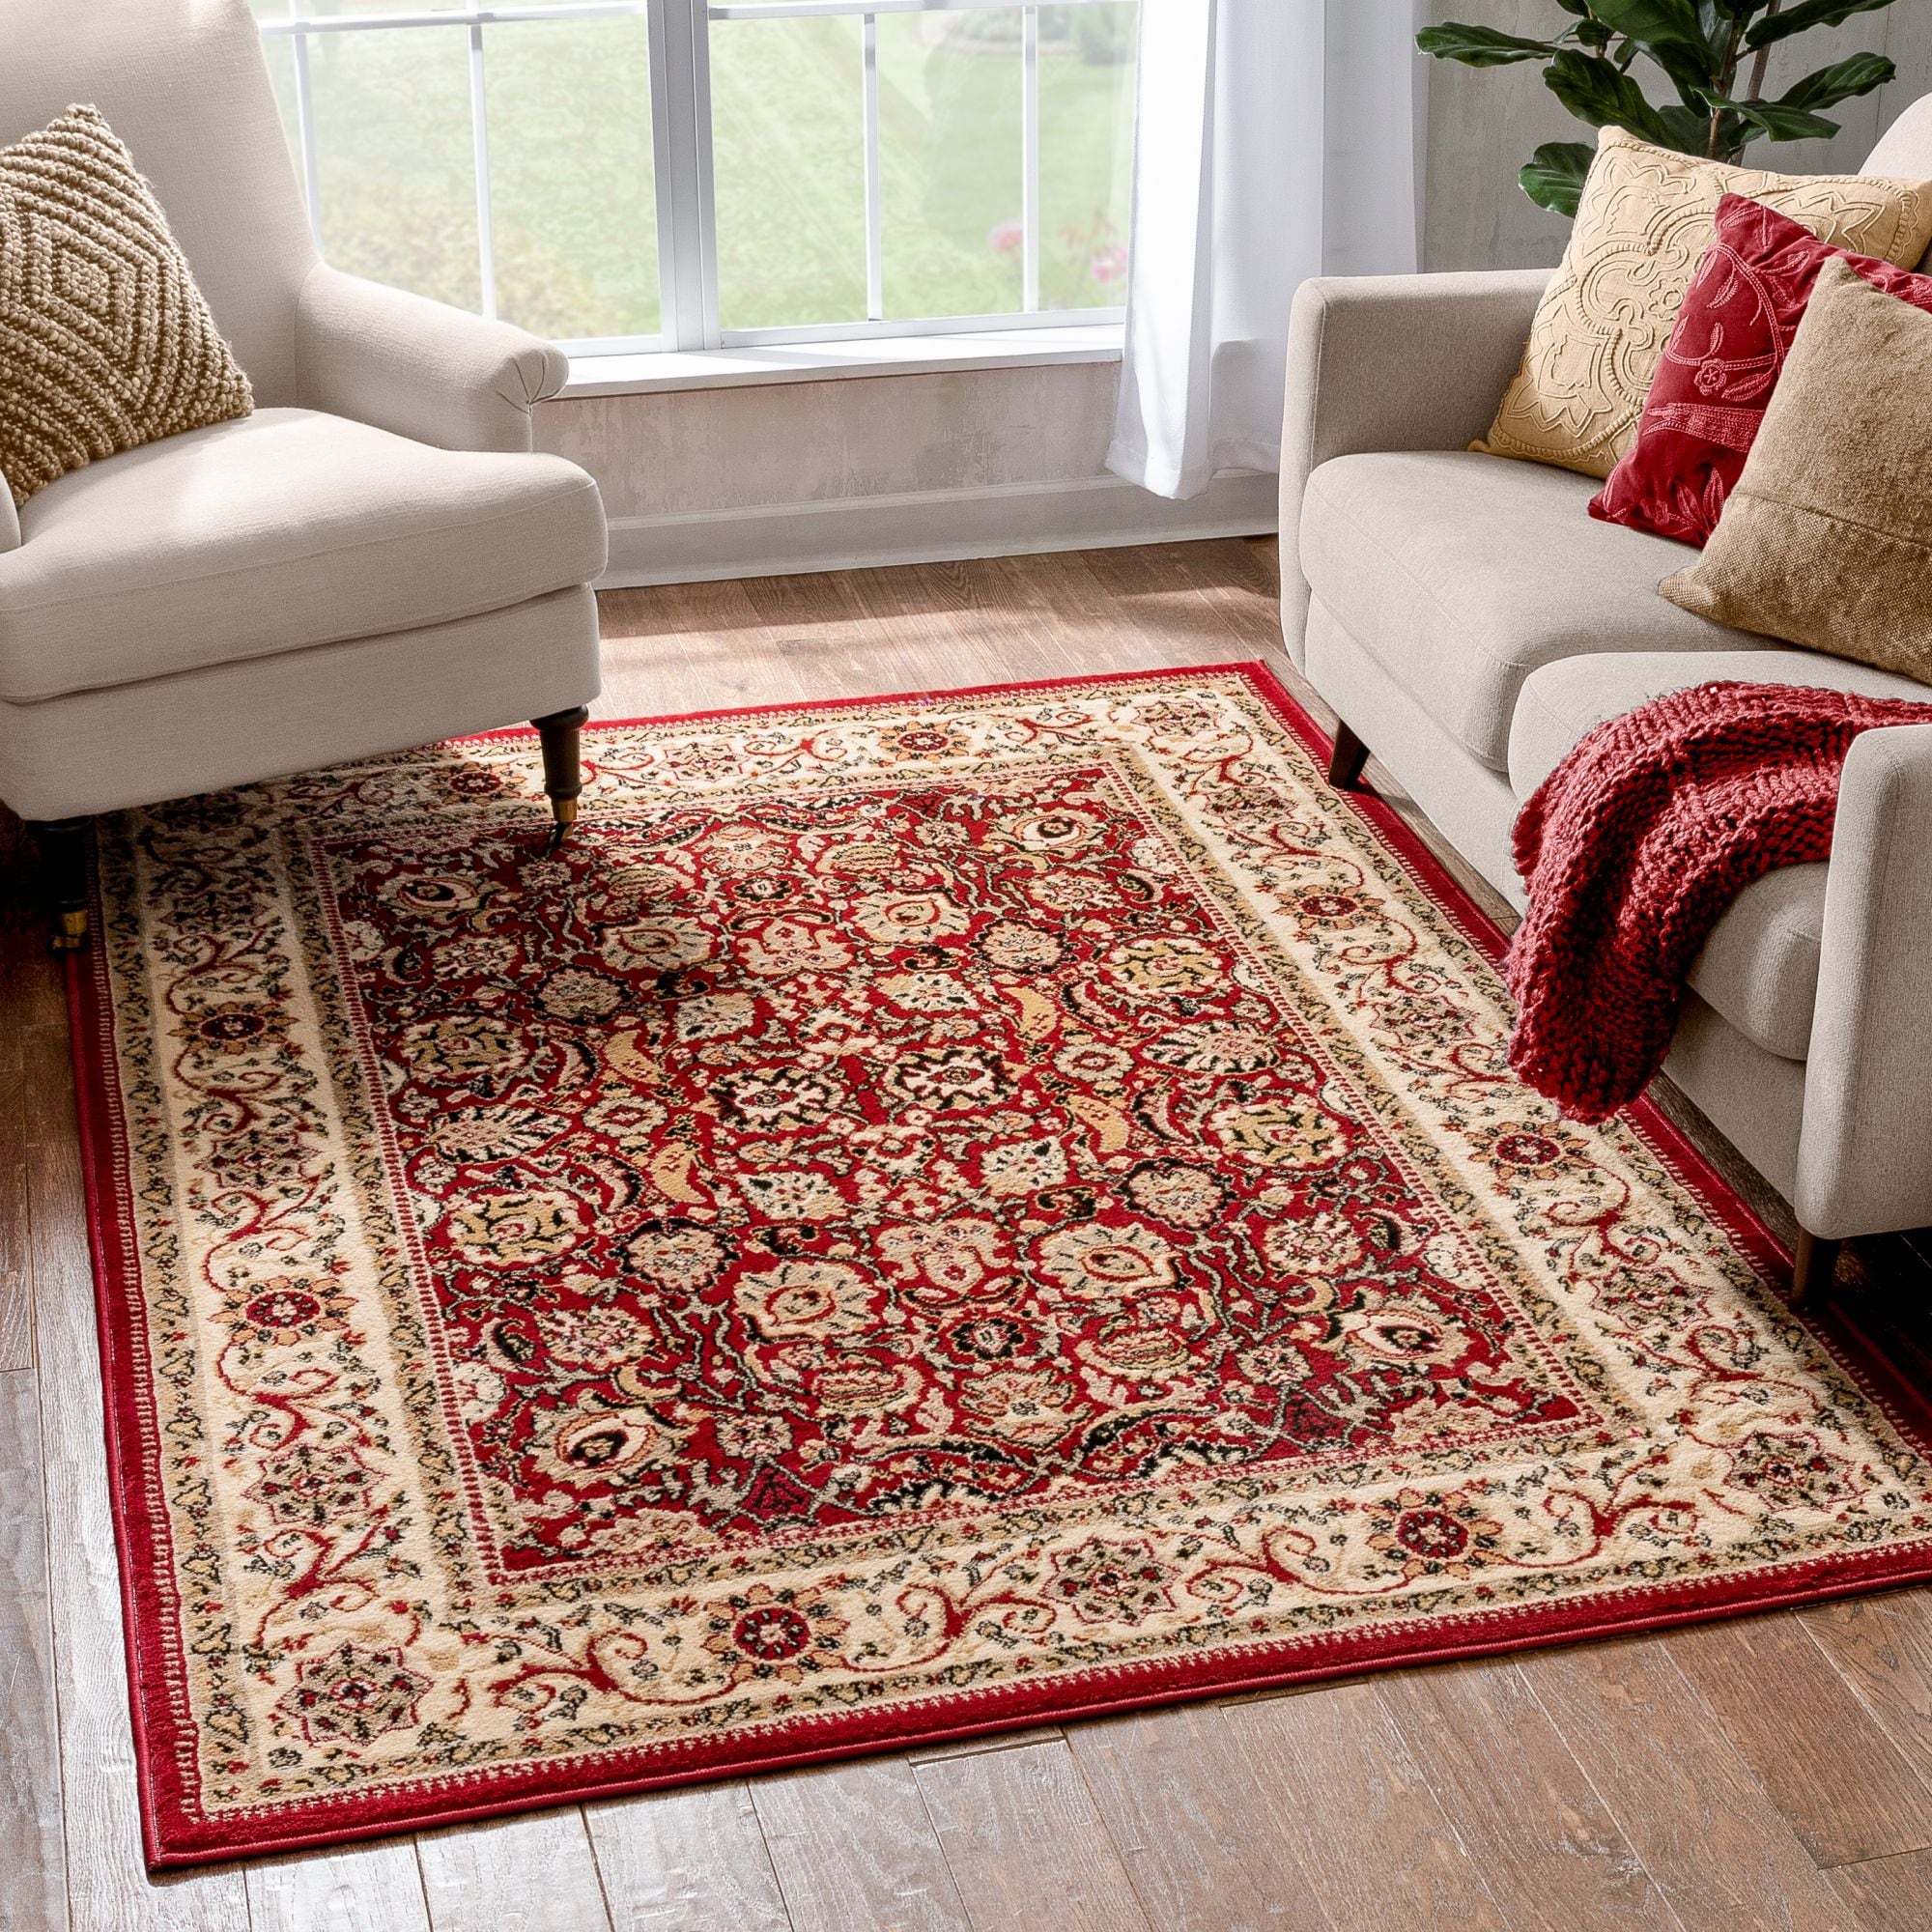 Well Woven Well Woven Persa Tabriz Traditional Area Rug in the Rugs ...